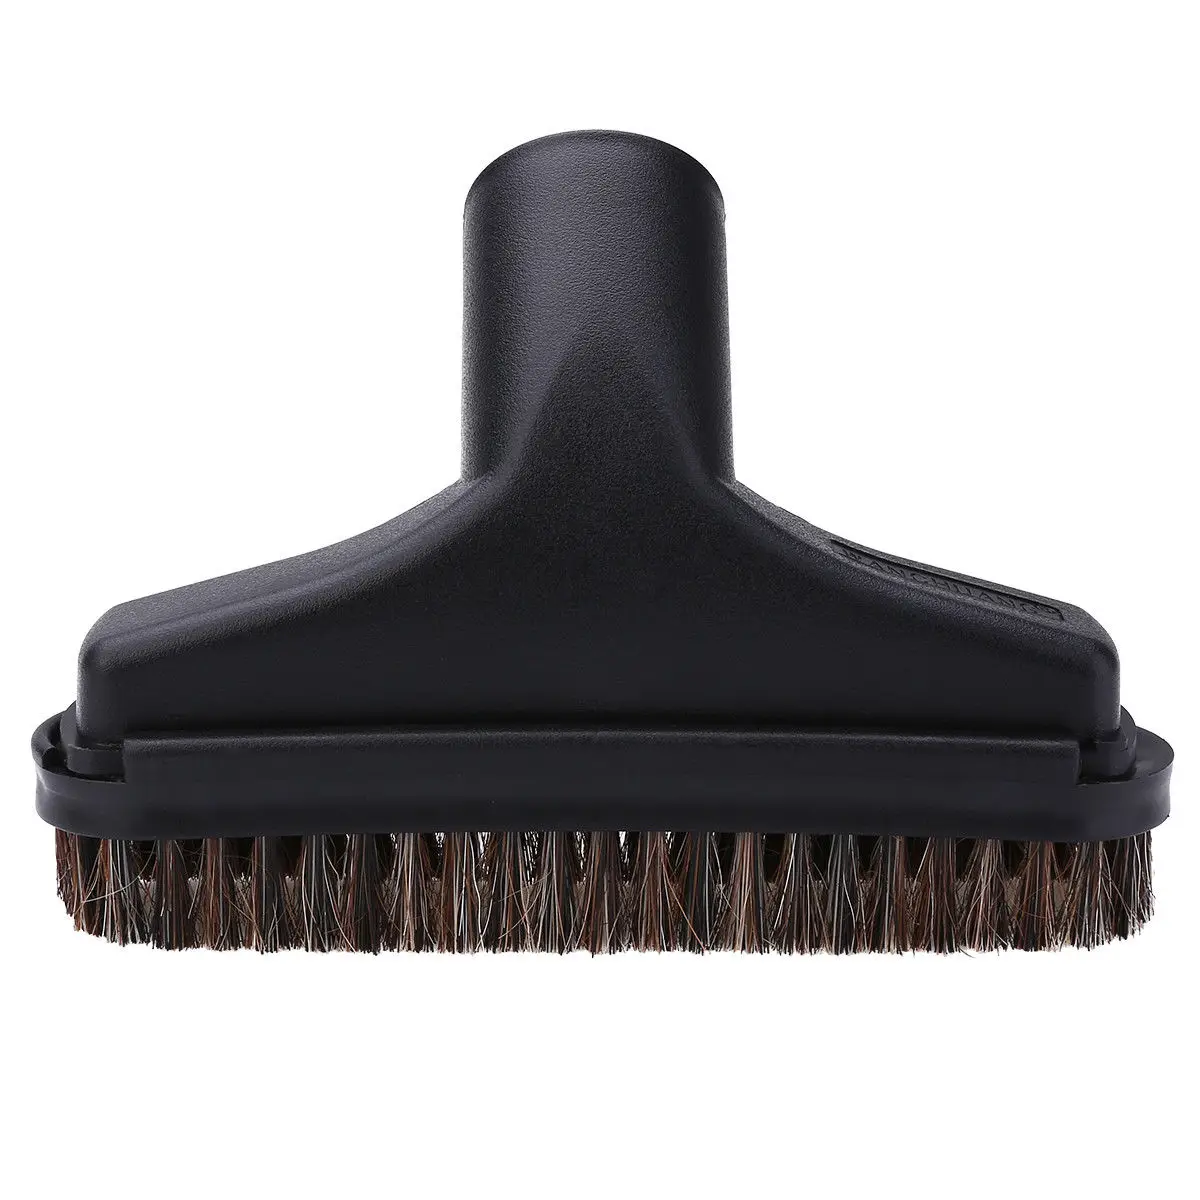 Replacement Stair Dusting Adaptor Black Accessories Brush Attachment Universal Head Carpet Hard Floor Tool Useful